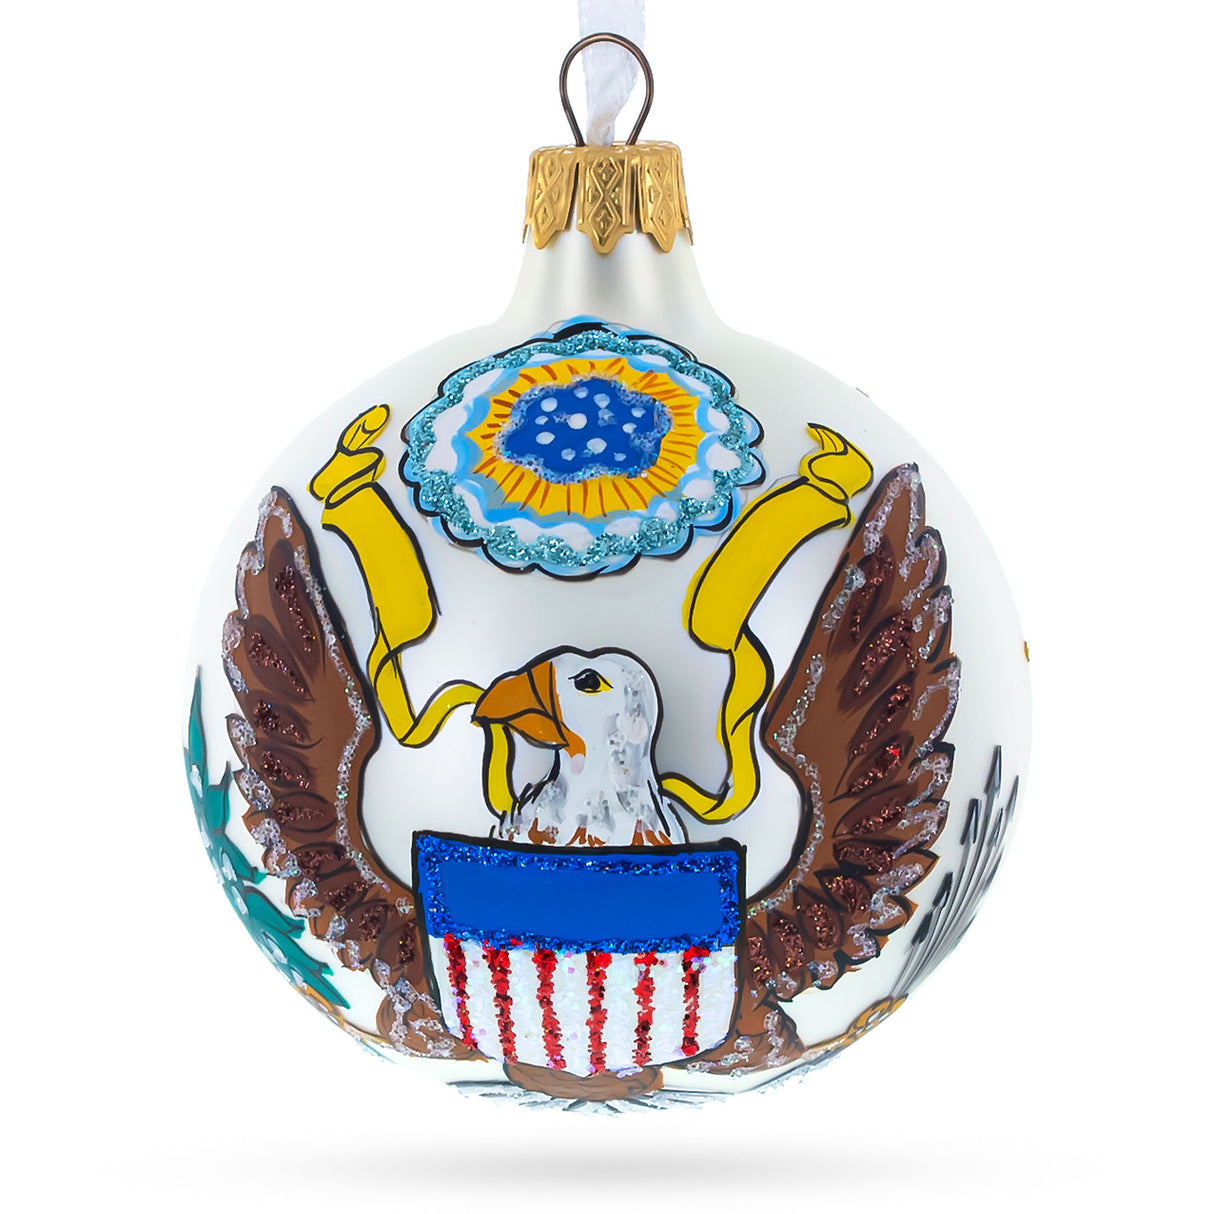 Glass Patriotic Elegance: USA Coat of Arms Blown Glass Ball Christmas Ornament 3.25 Inches in Multi color Round